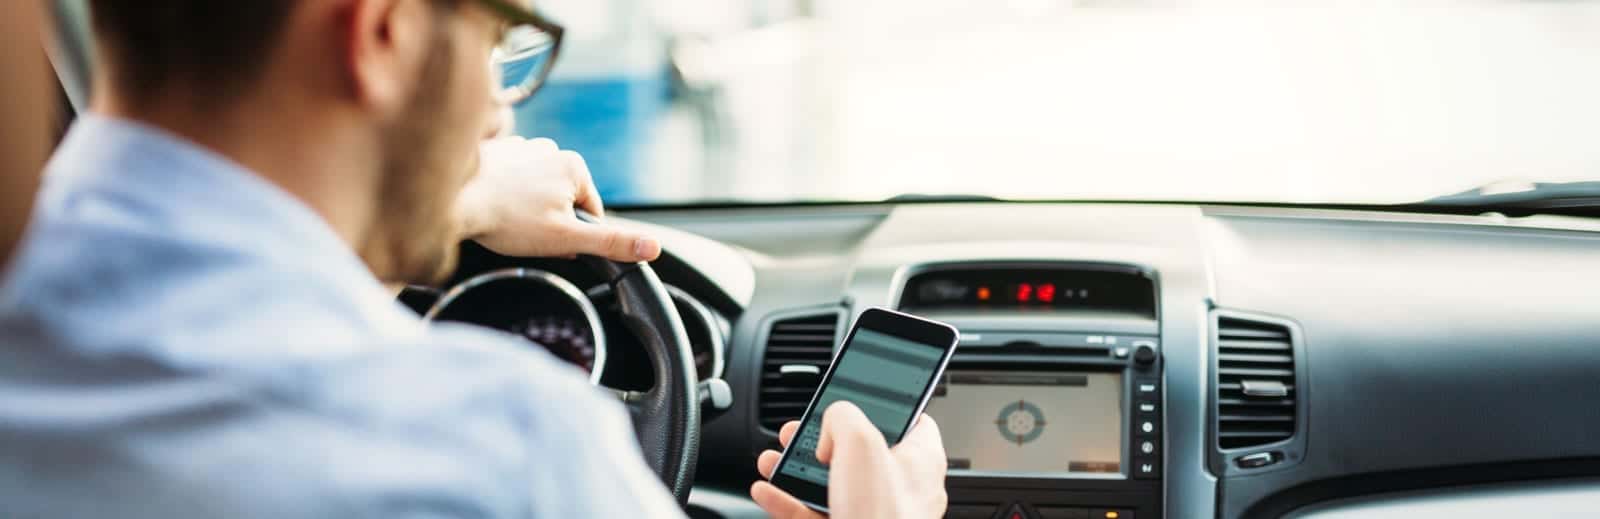 CDC Releases 2020 Distracted Driving Facts and Statistics